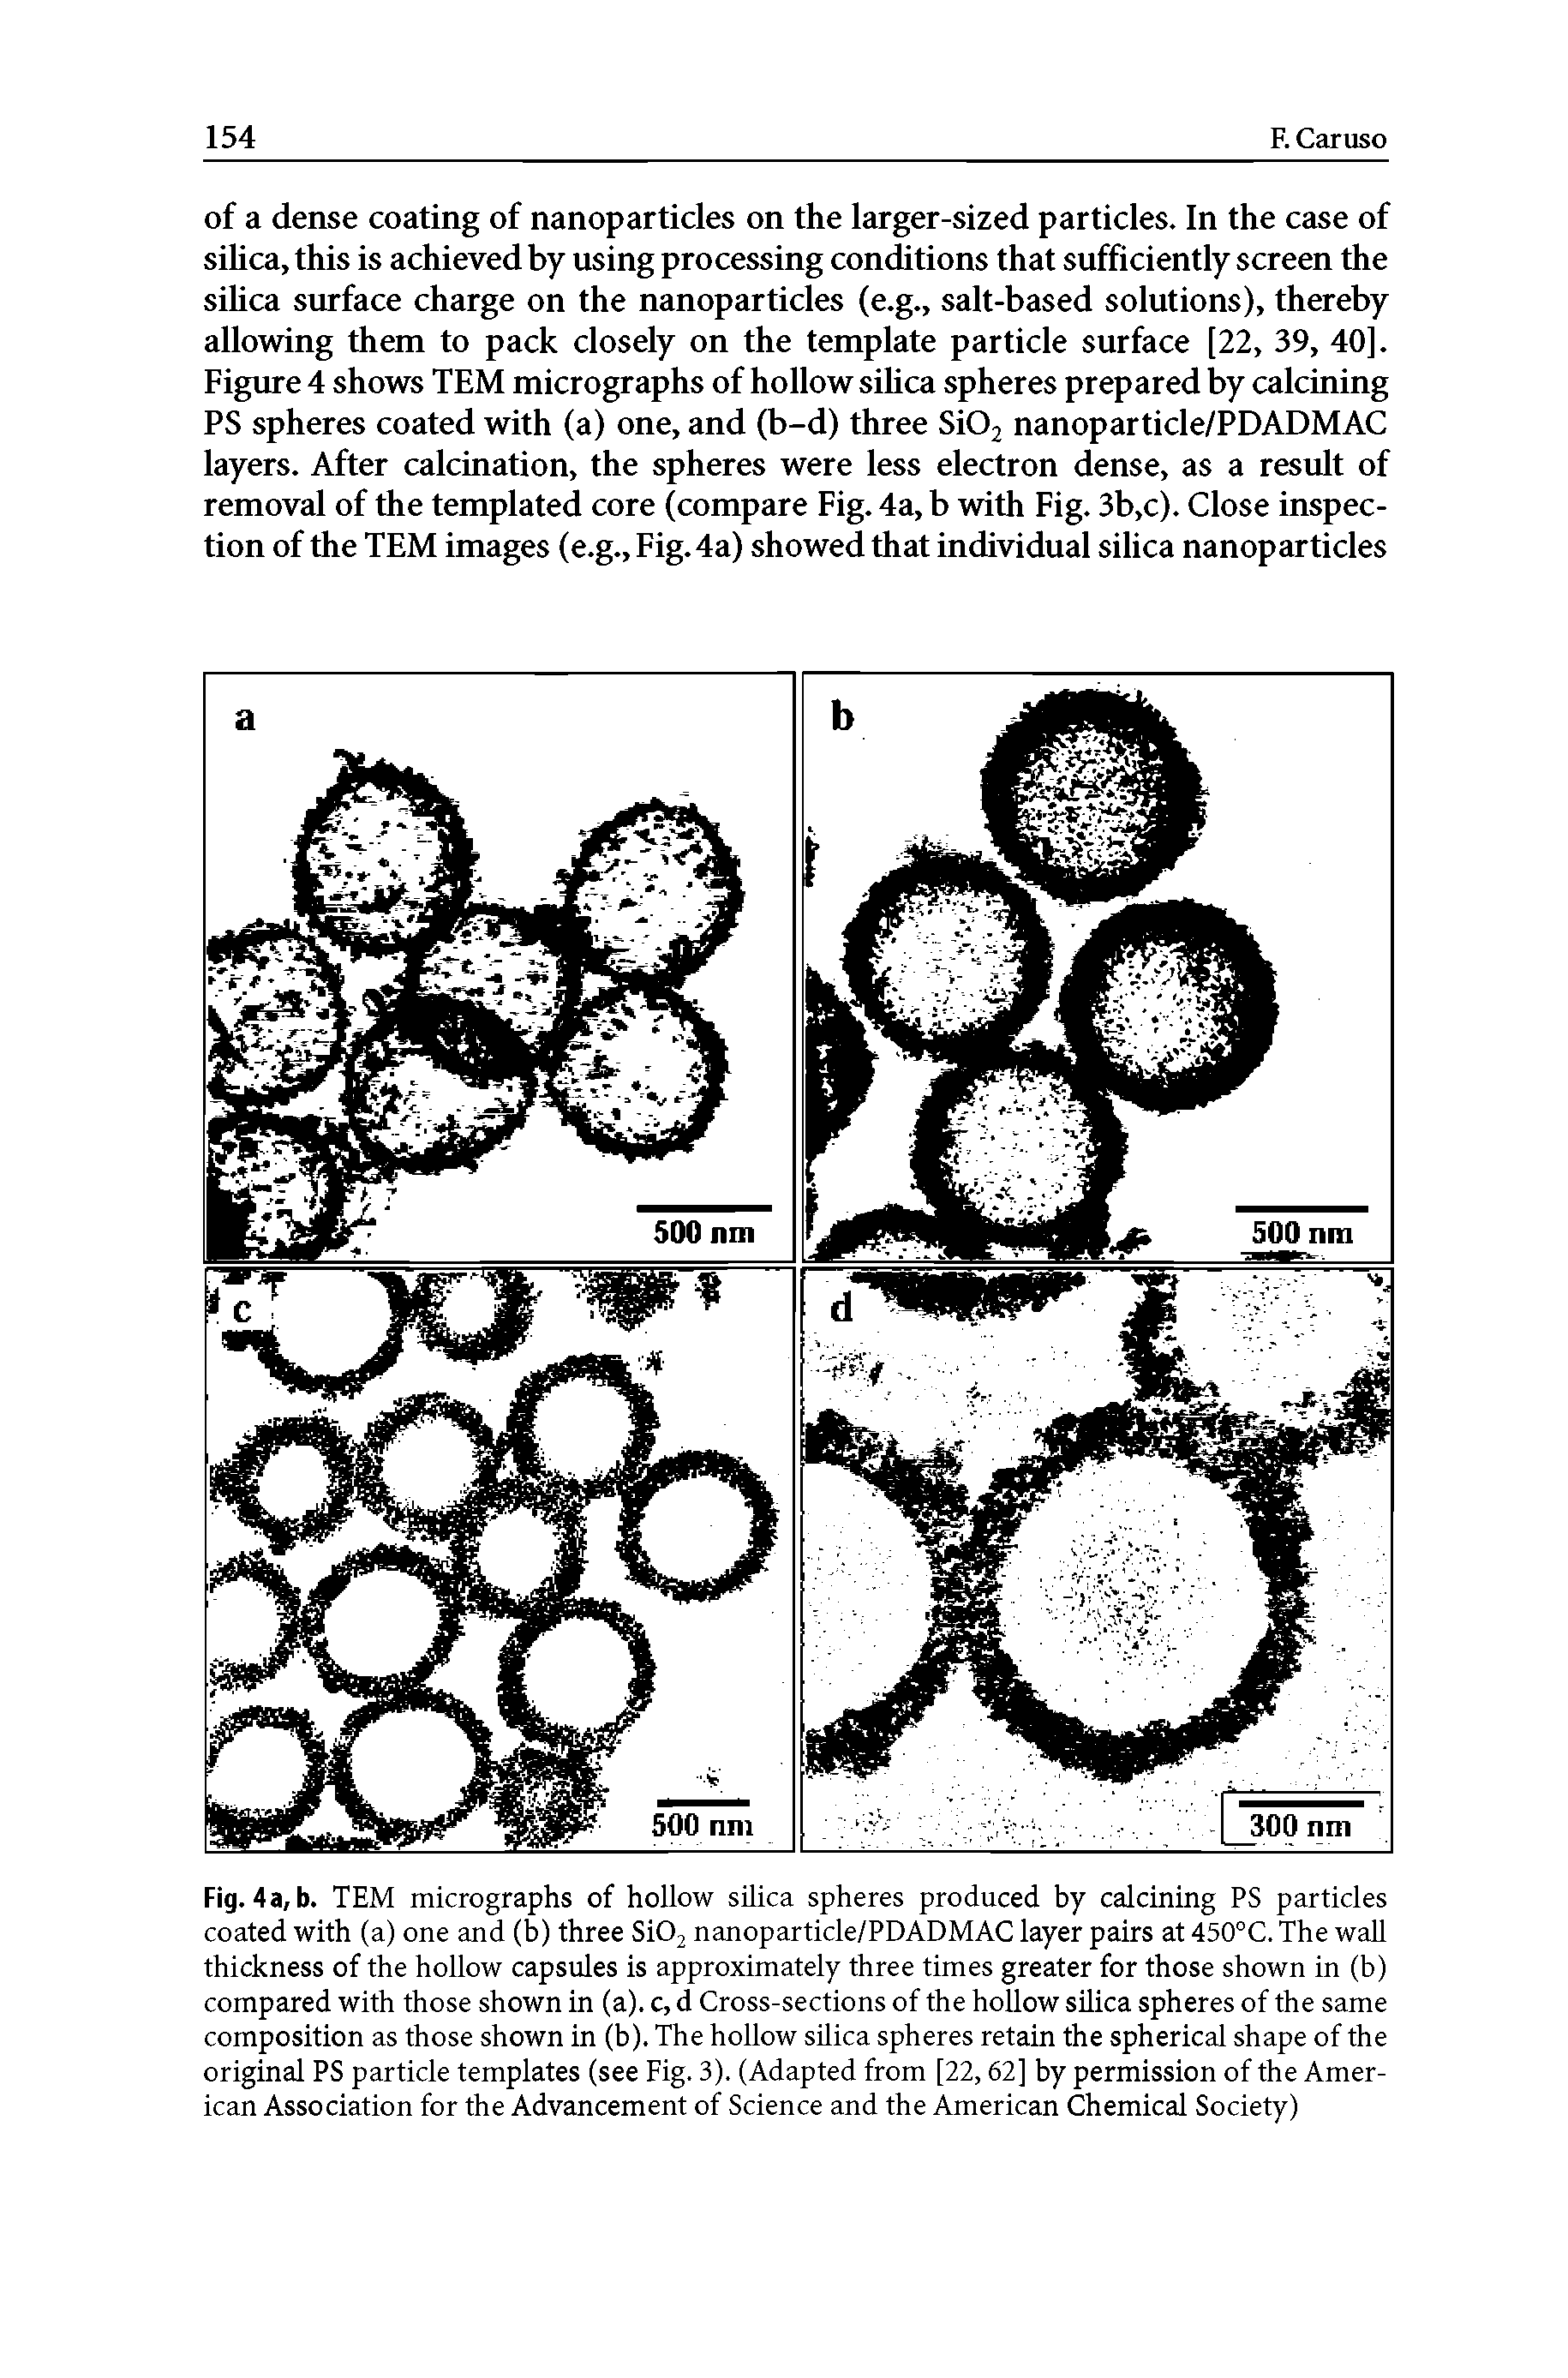 Fig. 4 a, b. TEM micrographs of hollow silica spheres produced by calcining PS particles coated with (a) one and (b) three Si02 nanoparticle/PDADMAC layer pairs at 450°C. The wall thickness of the hollow capsules is approximately three times greater for those shown in (b) compared with those shown in (a), c, d Cross-sections of the hollow silica spheres of the same composition as those shown in (b). The hollow silica spheres retain the spherical shape of the original PS particle templates (see Fig. 3). (Adapted from [22,62] by permission of the American Association for the Advancement of Science and the American Chemical Society)...